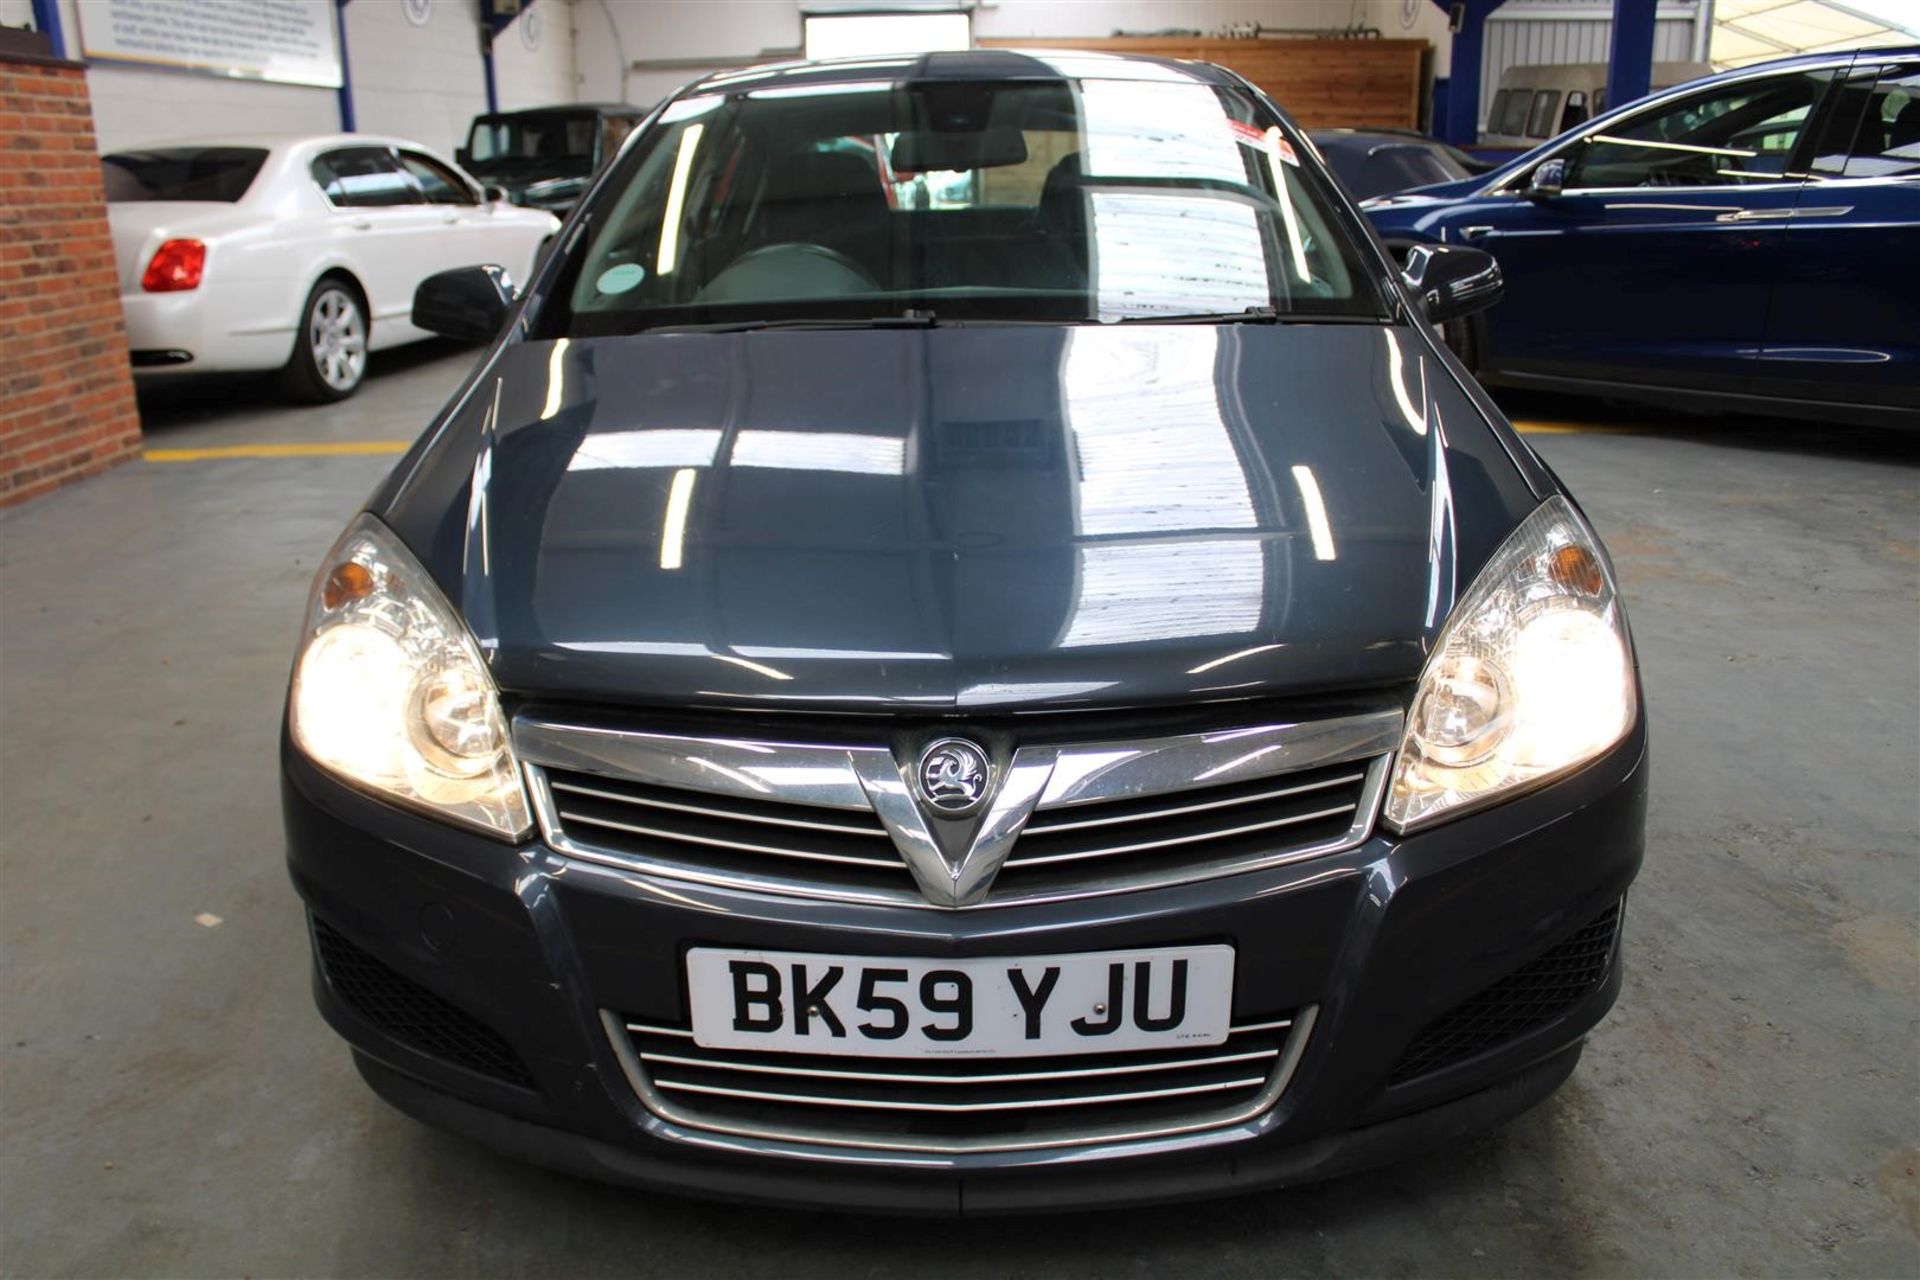 59 09 Vauxhall Astra Active - Image 2 of 27